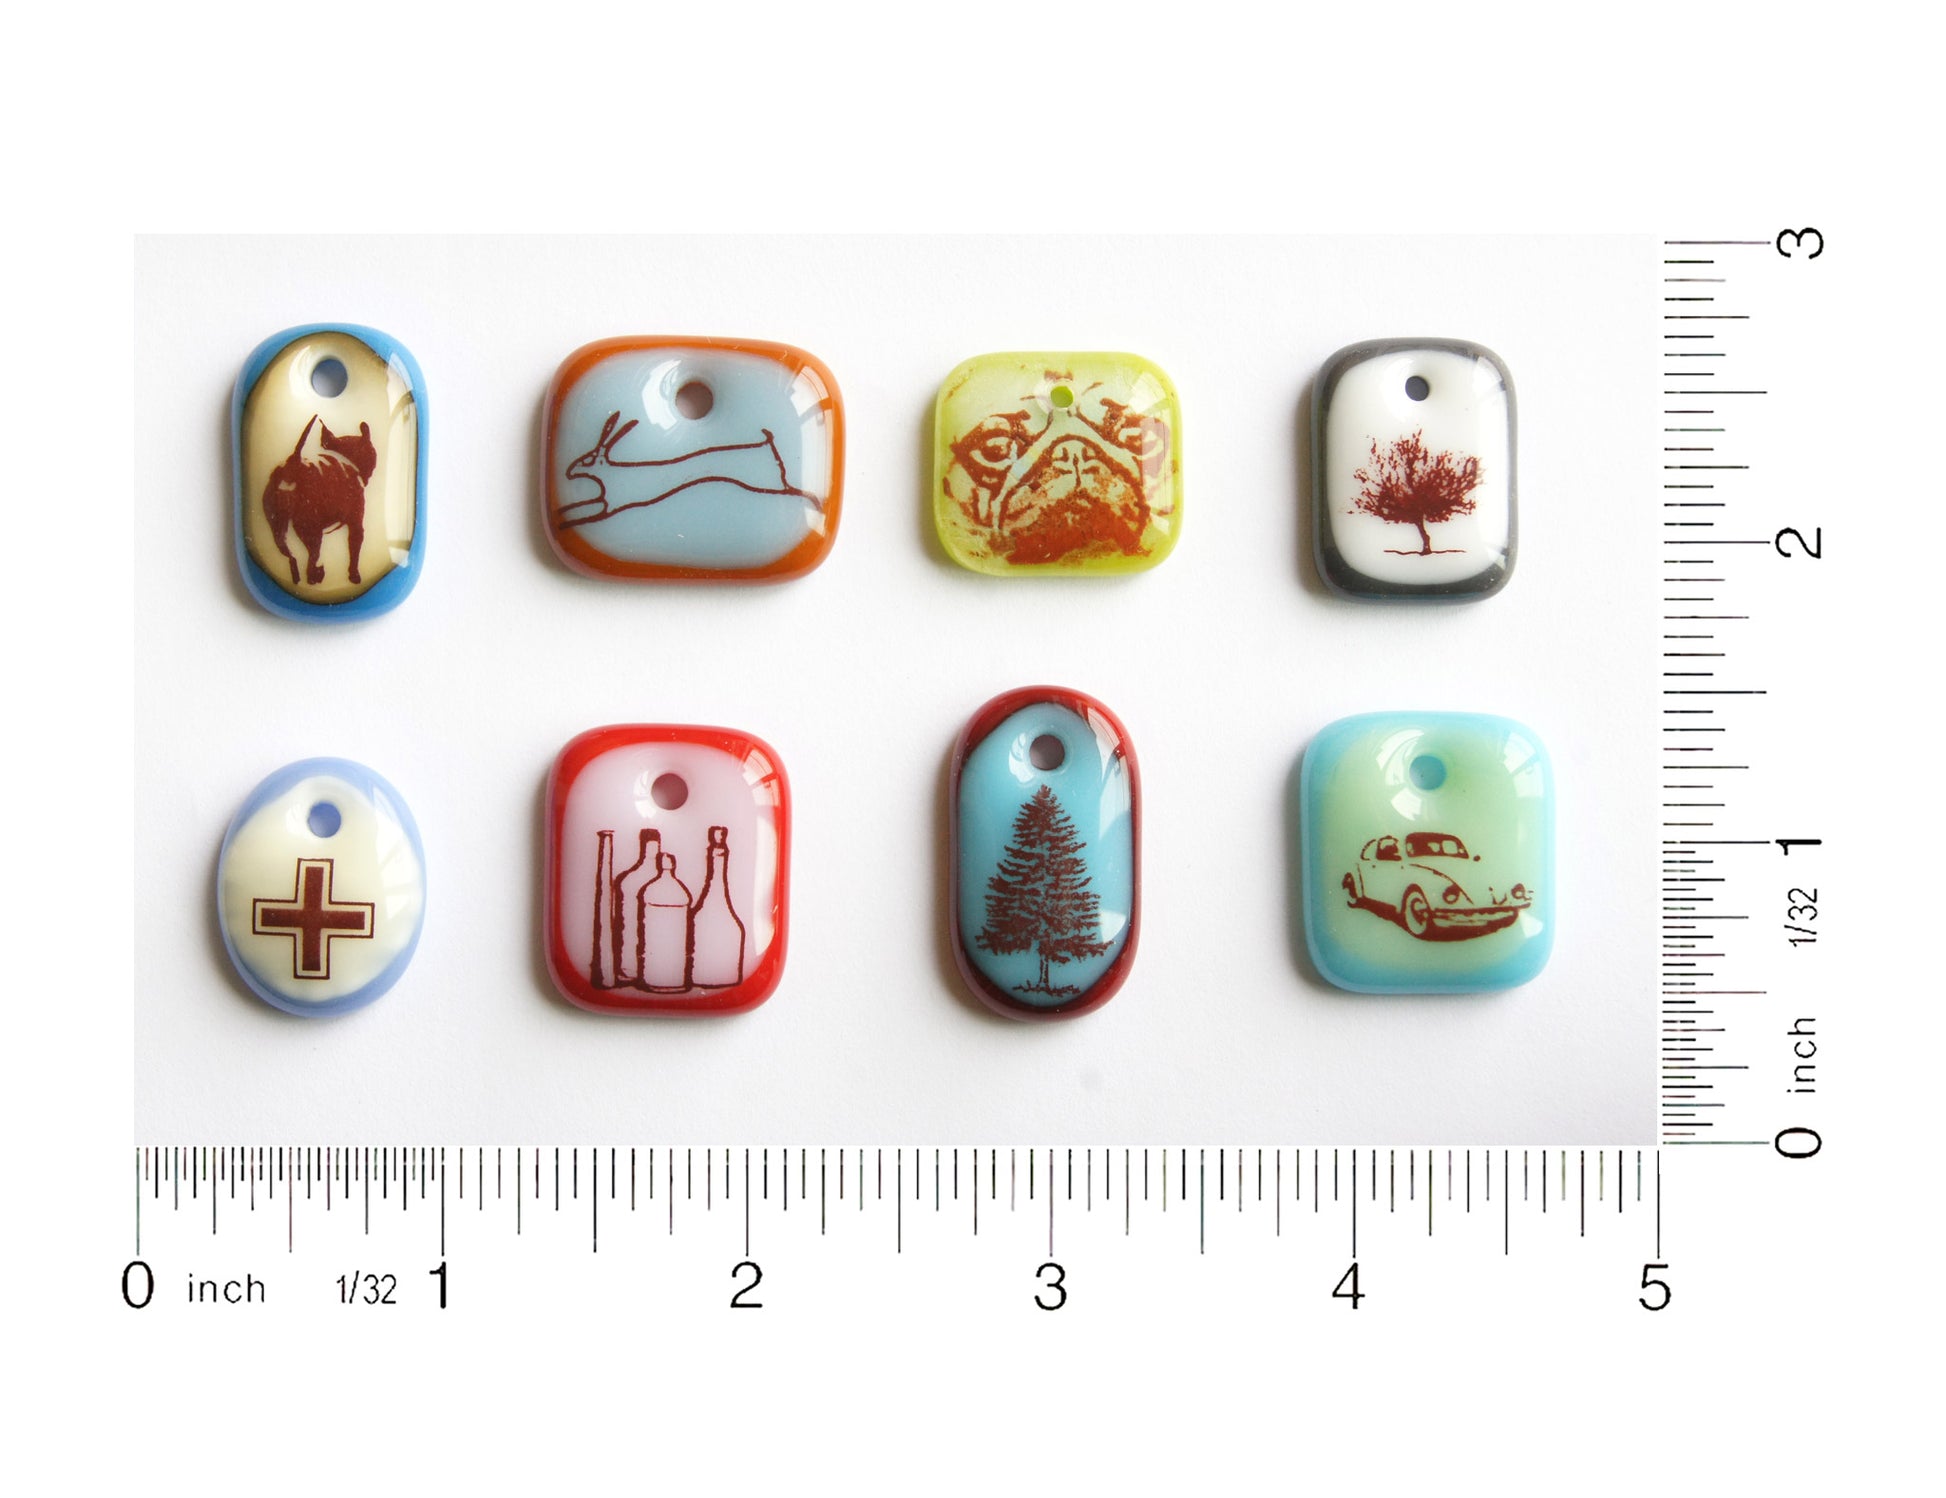 Eight colourful glass pendants handmade by Leila Cools on grid with ruler guide